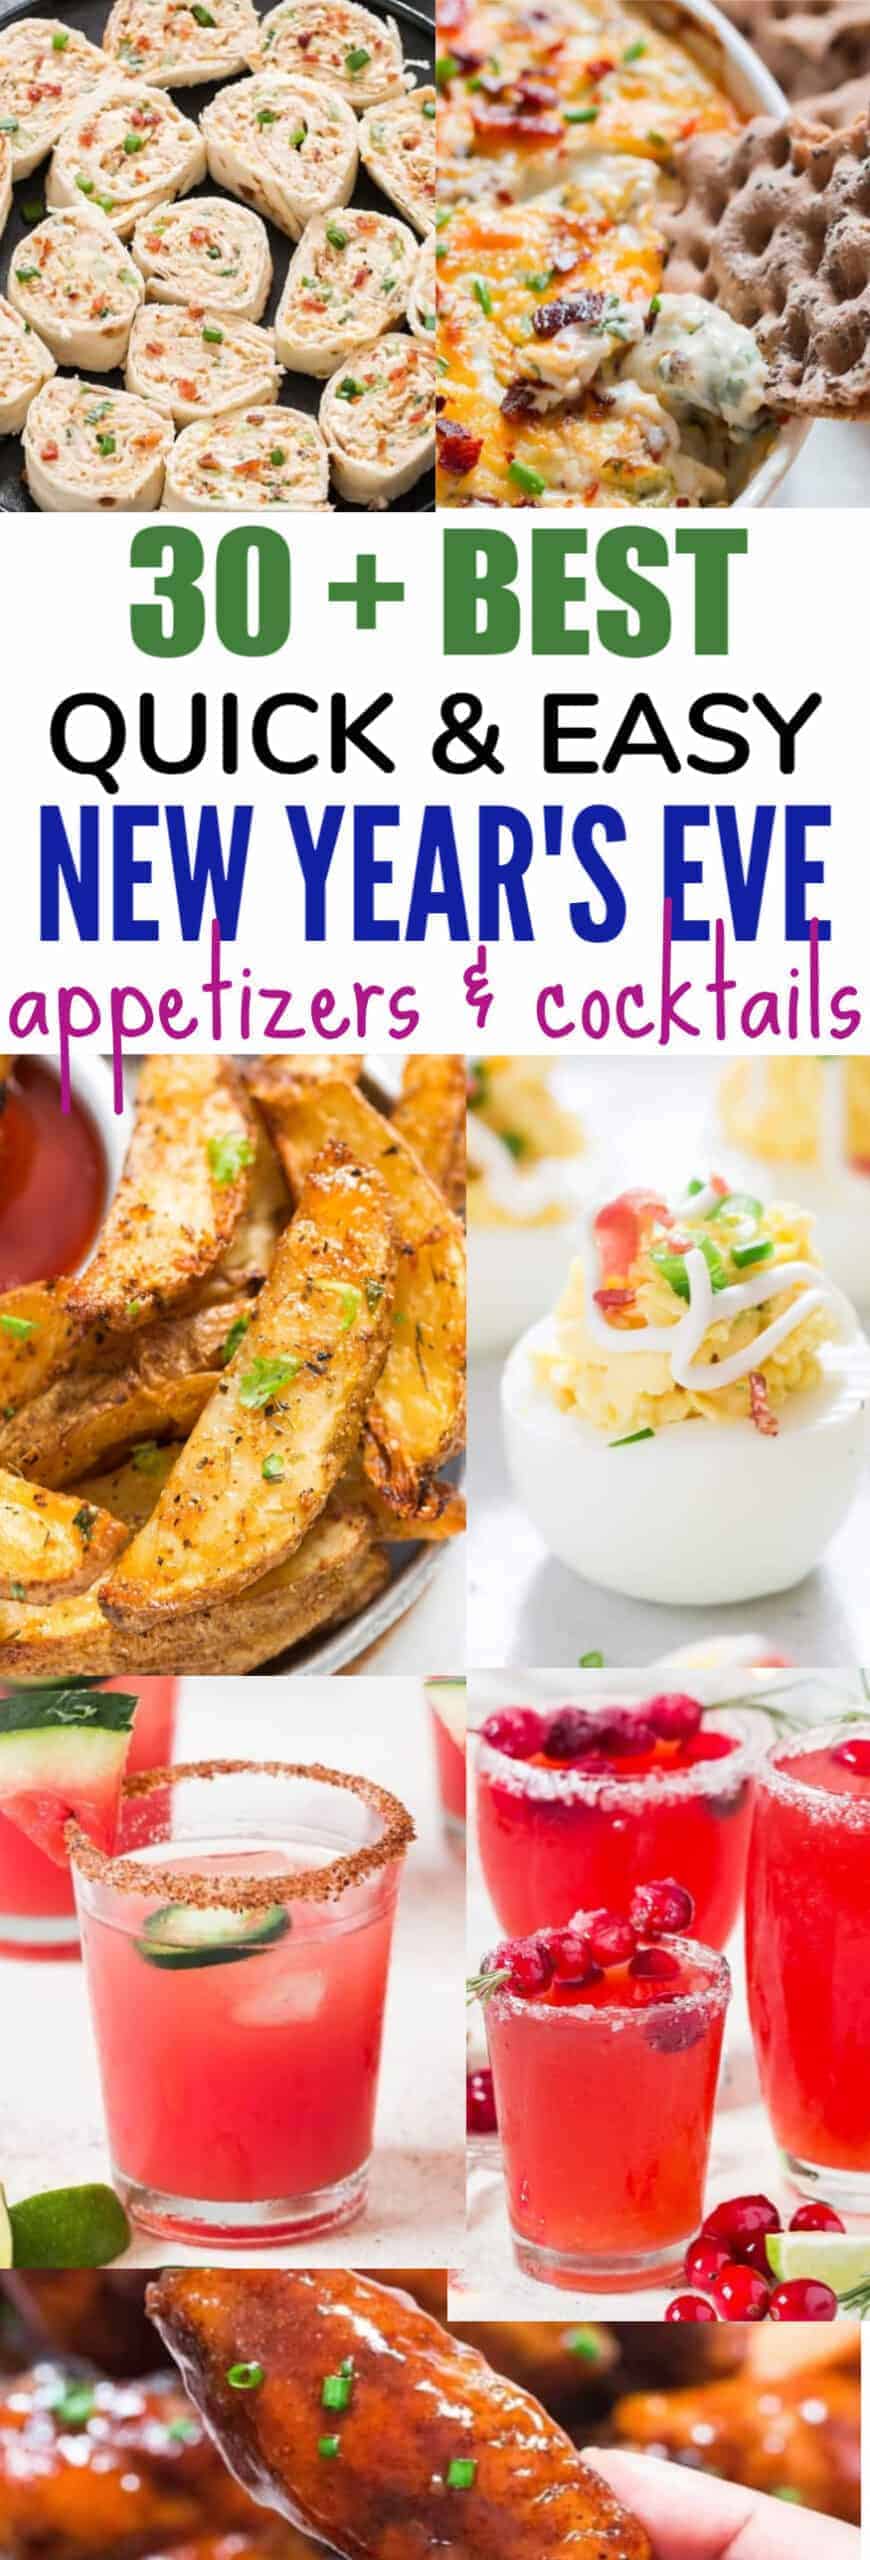 new year's eve appetizers & cocktails